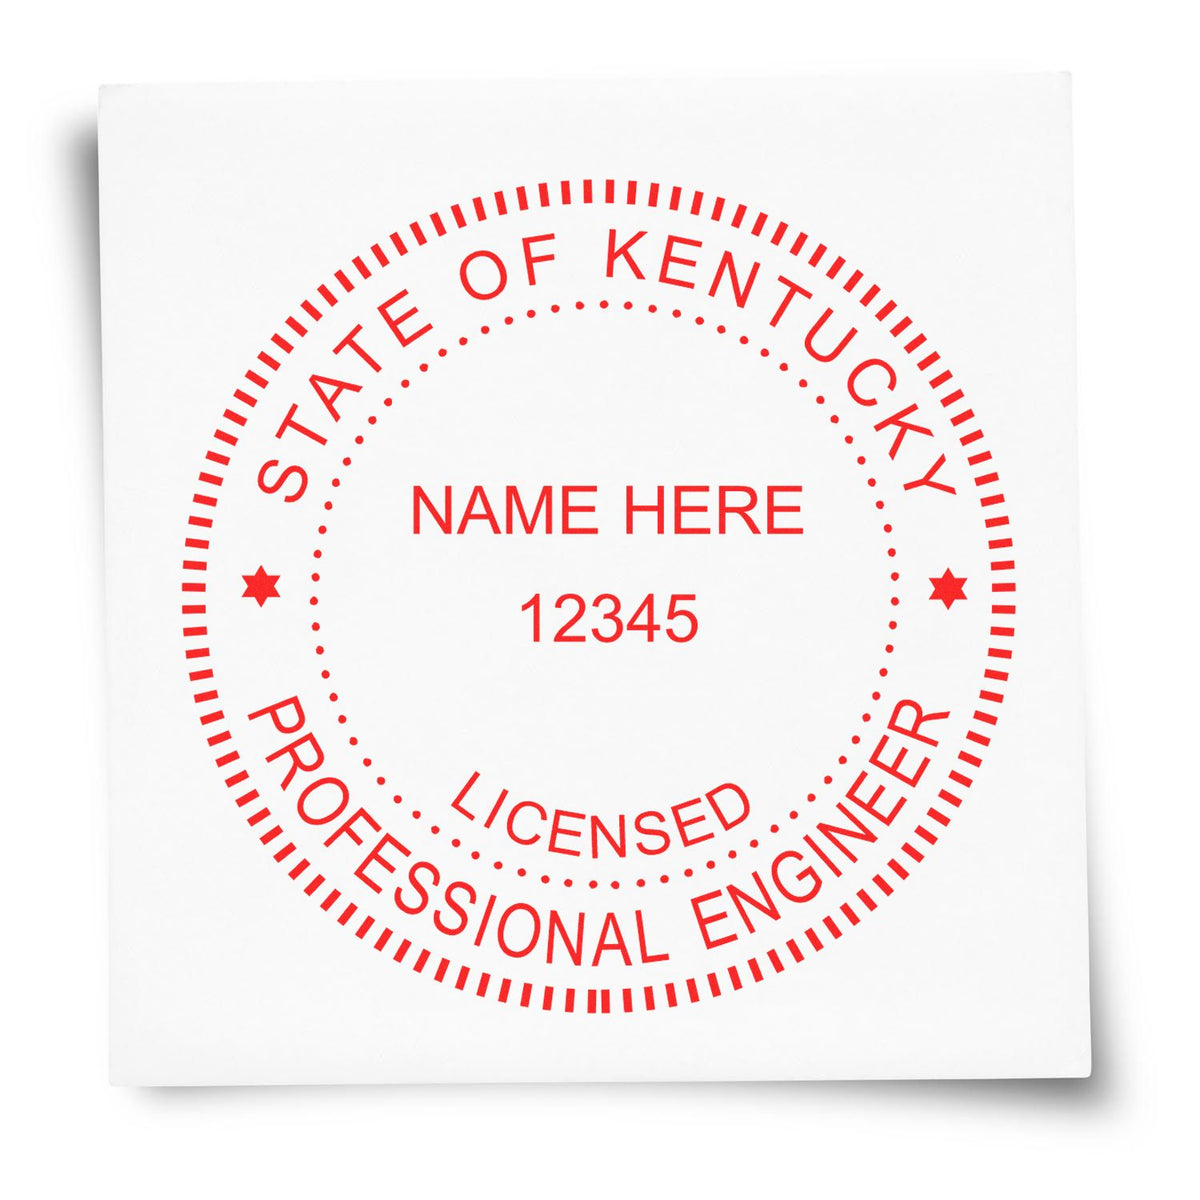 A photograph of the Digital Kentucky PE Stamp and Electronic Seal for Kentucky Engineer stamp impression reveals a vivid, professional image of the on paper.